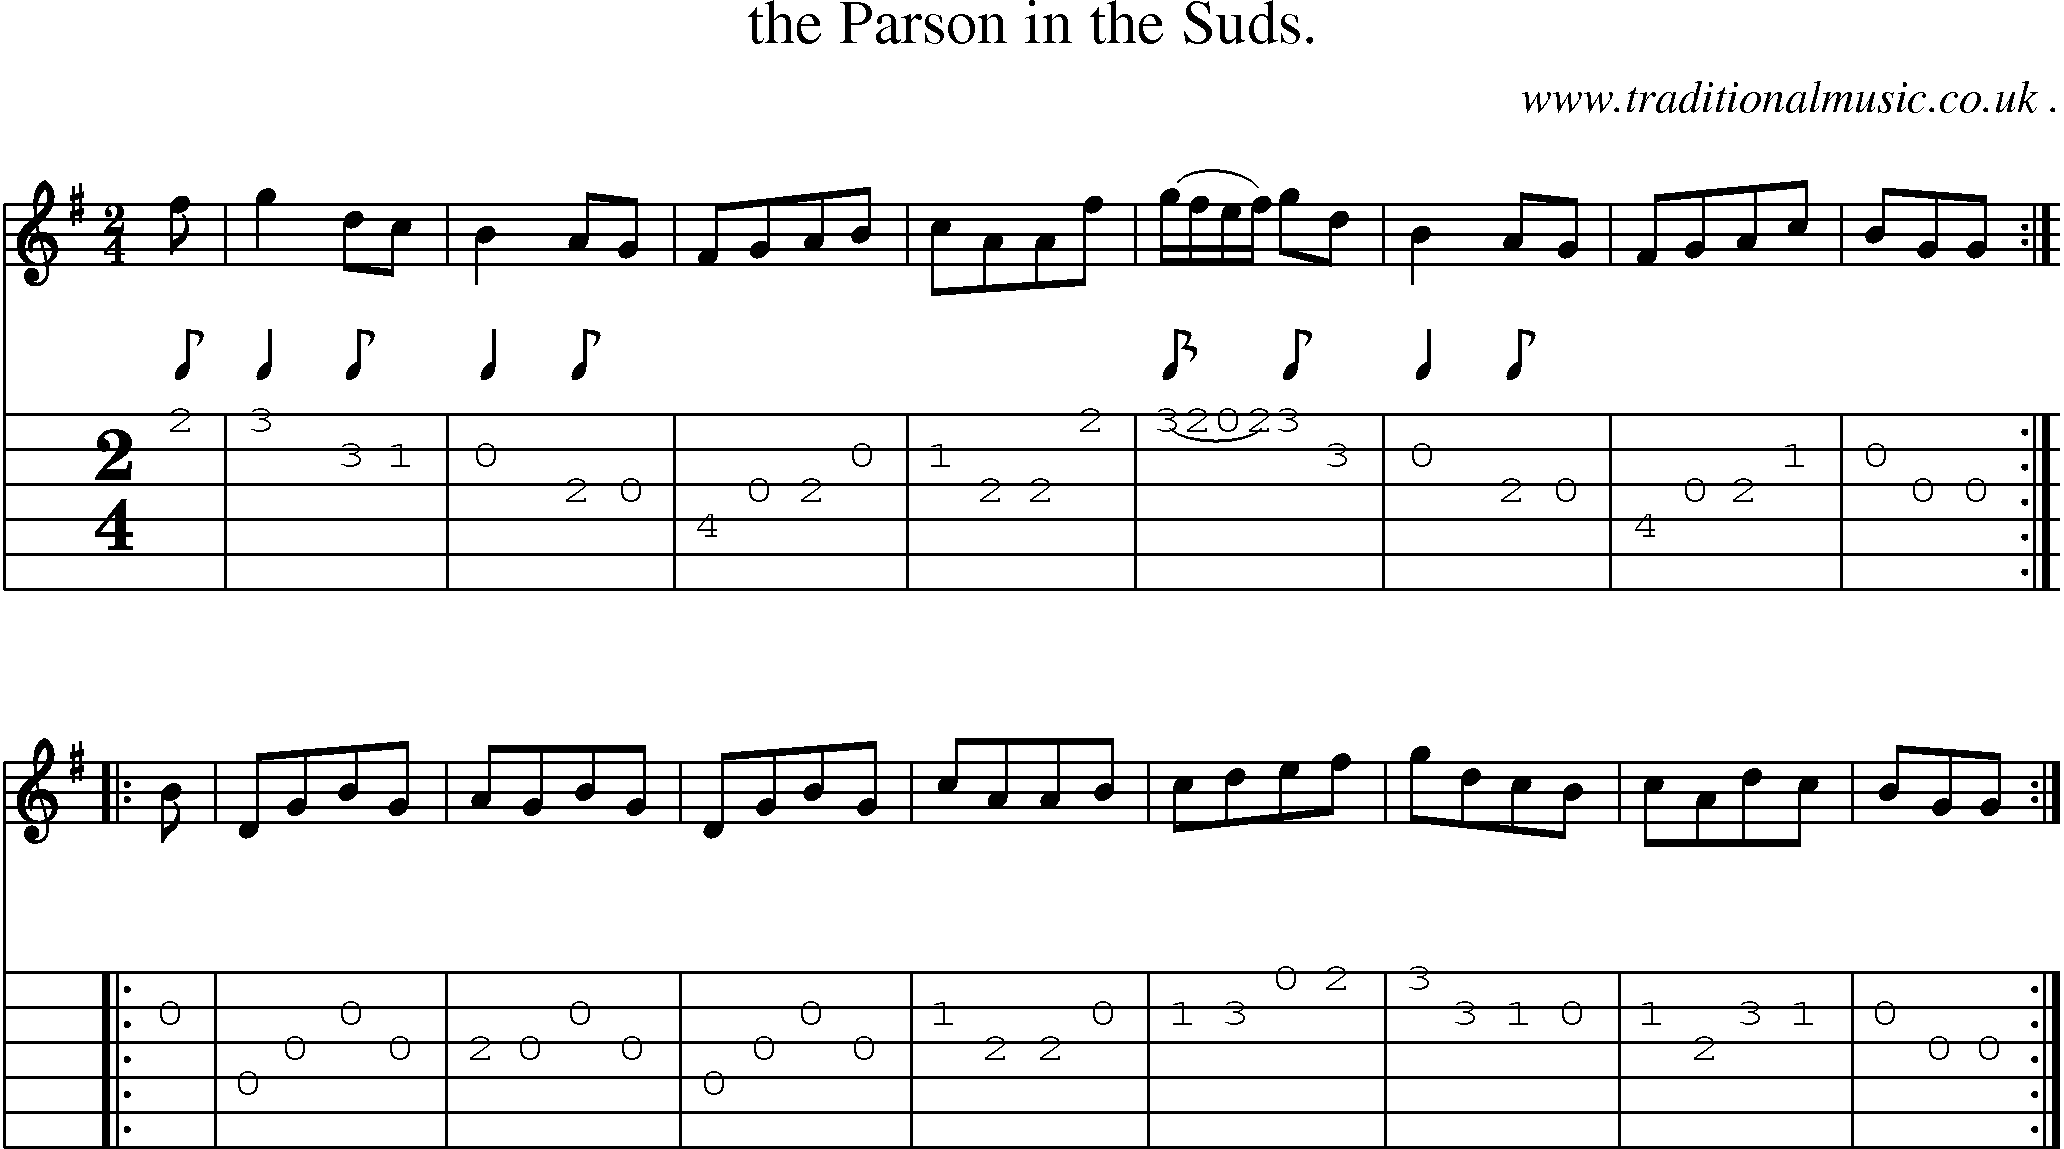 Sheet-Music and Guitar Tabs for The Parson In The Suds